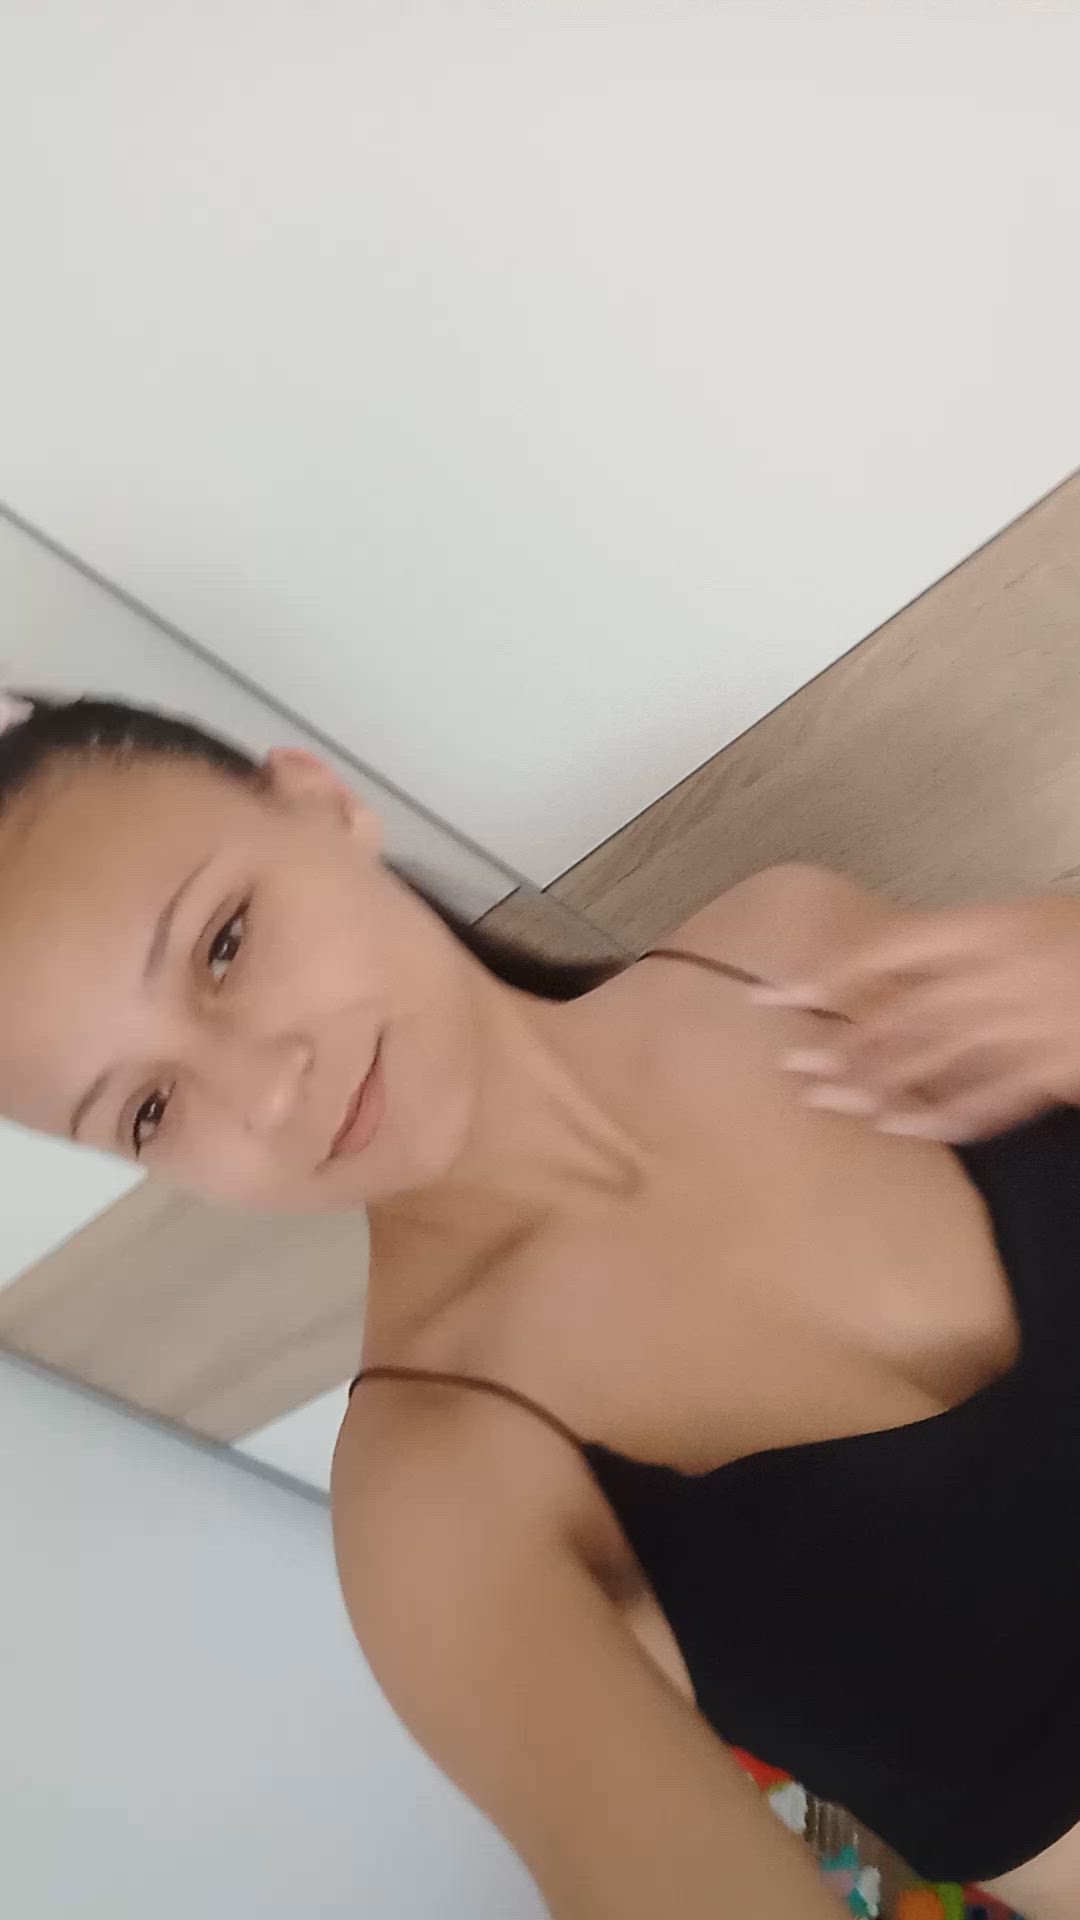 Tits porn video with onlyfans model lizzplay <strong>@lizzplay</strong>